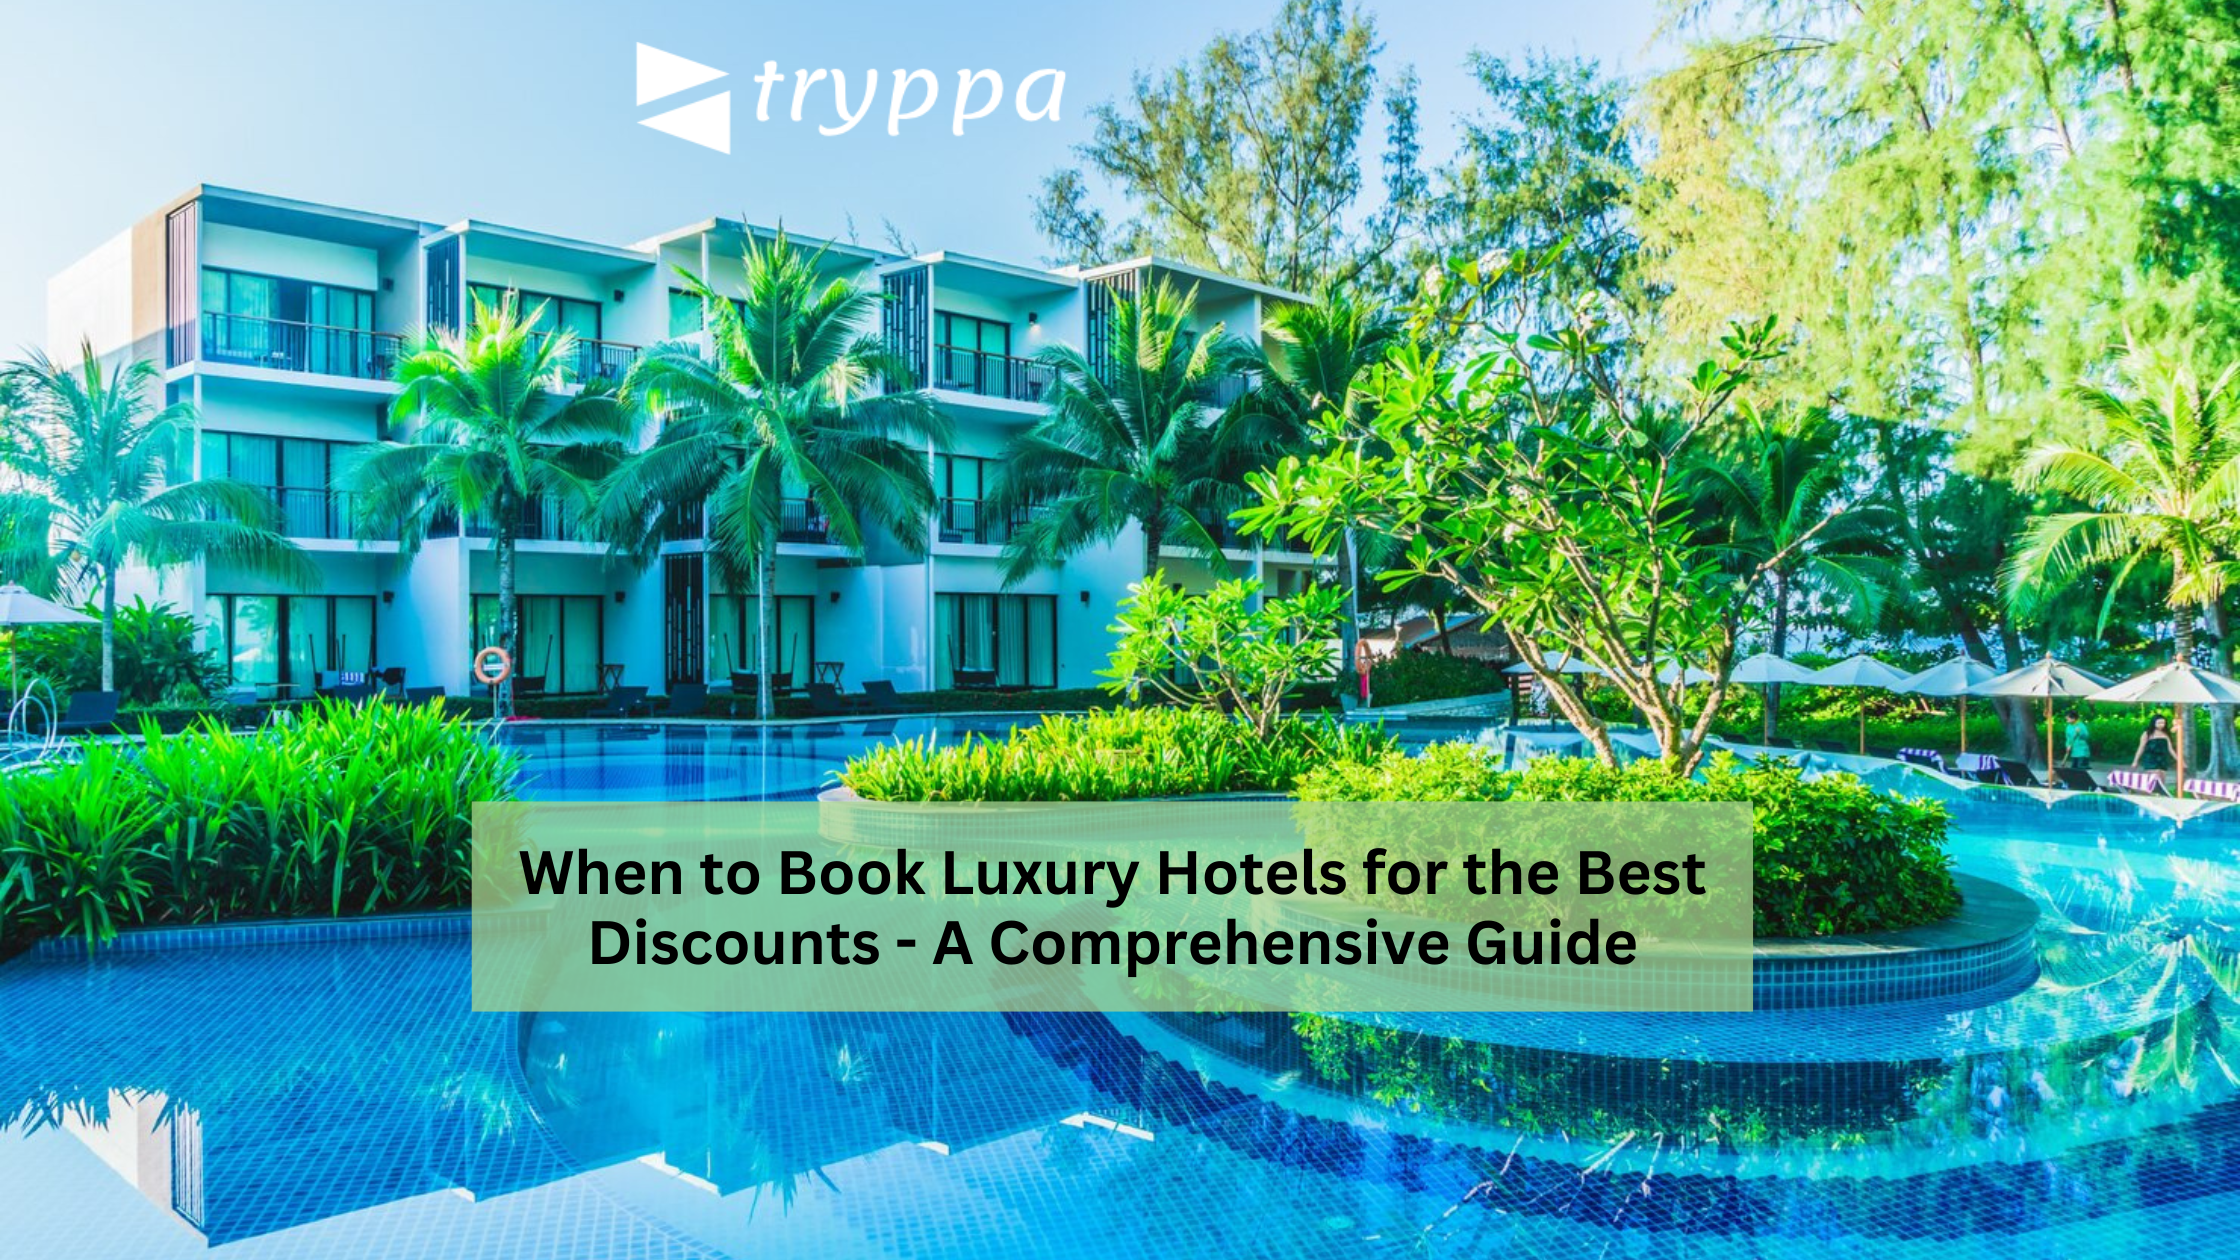 When to Book Luxury Hotels for the Best Discounts – A Comprehensive Guide